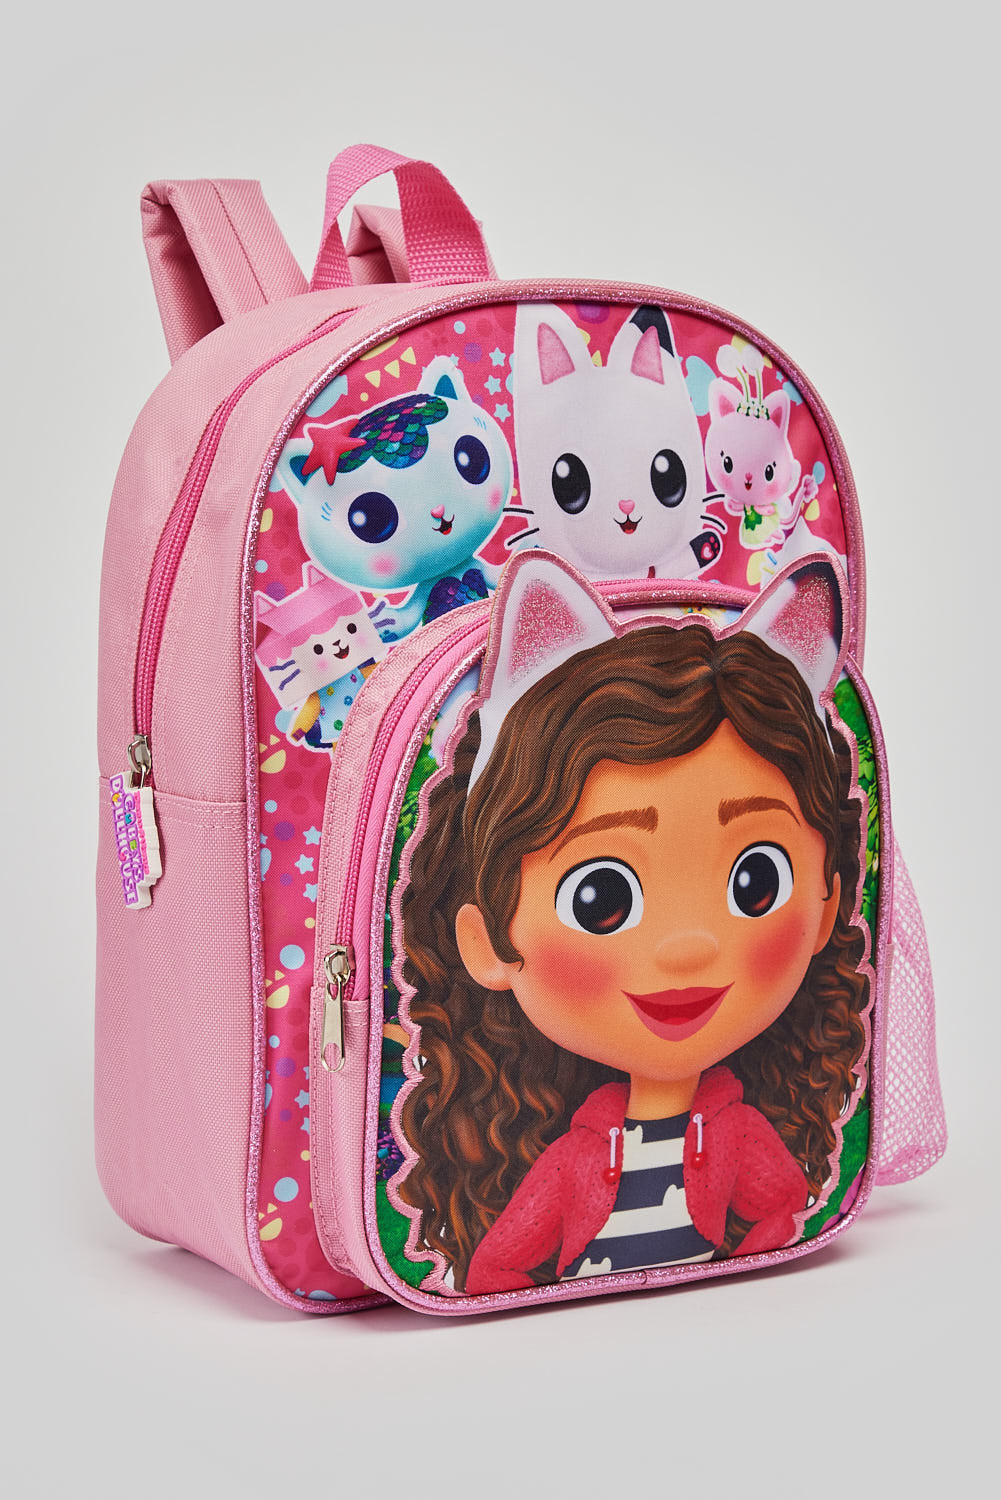 GABBY’S DOLL HOUSE ‘GABBY CATS’ ARCH BACKPACK